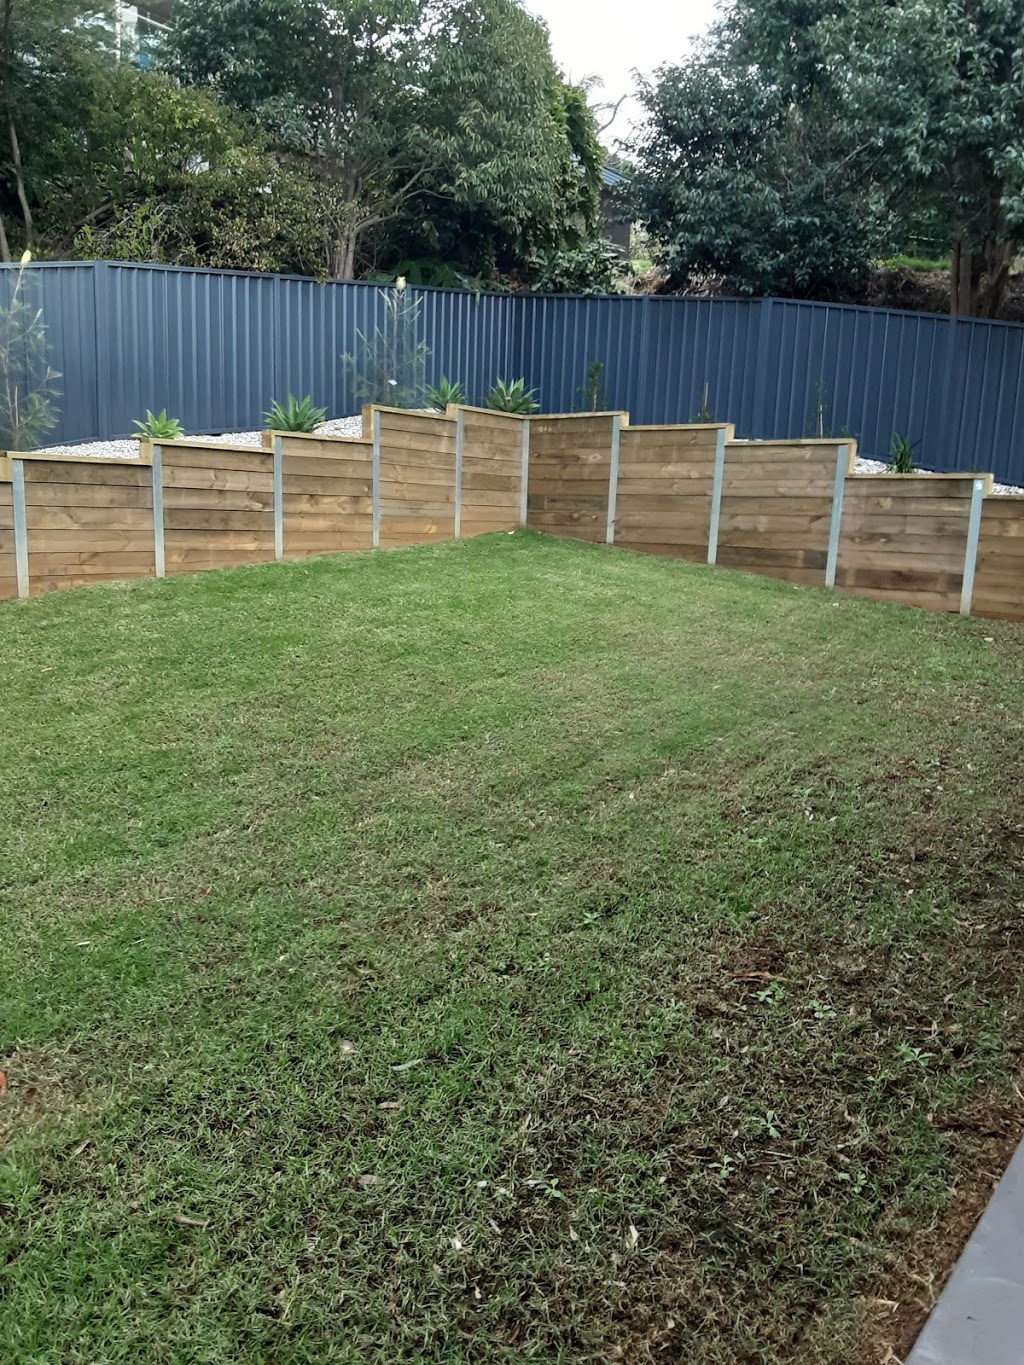 Hunts Fencing | general contractor | 124 Greenwell Point Rd, Nowra NSW 2541, Australia | 0431160171 OR +61 431 160 171